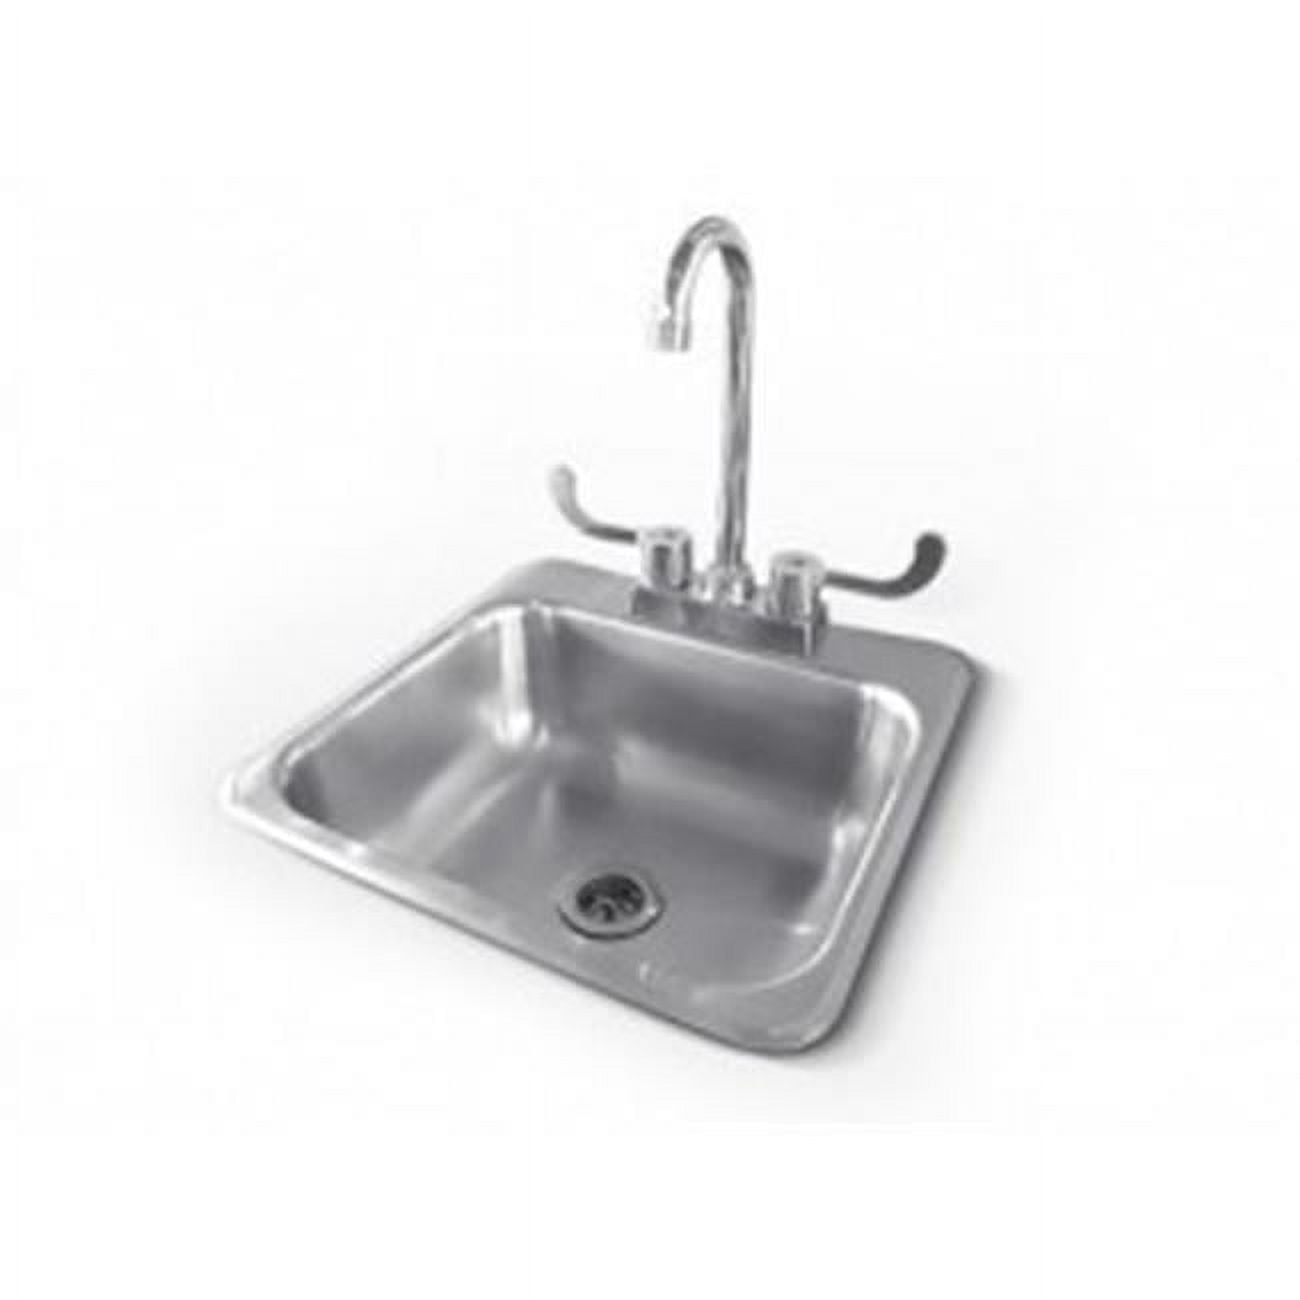 Rsnk1 Stainless Sink & Faucet Was 107500